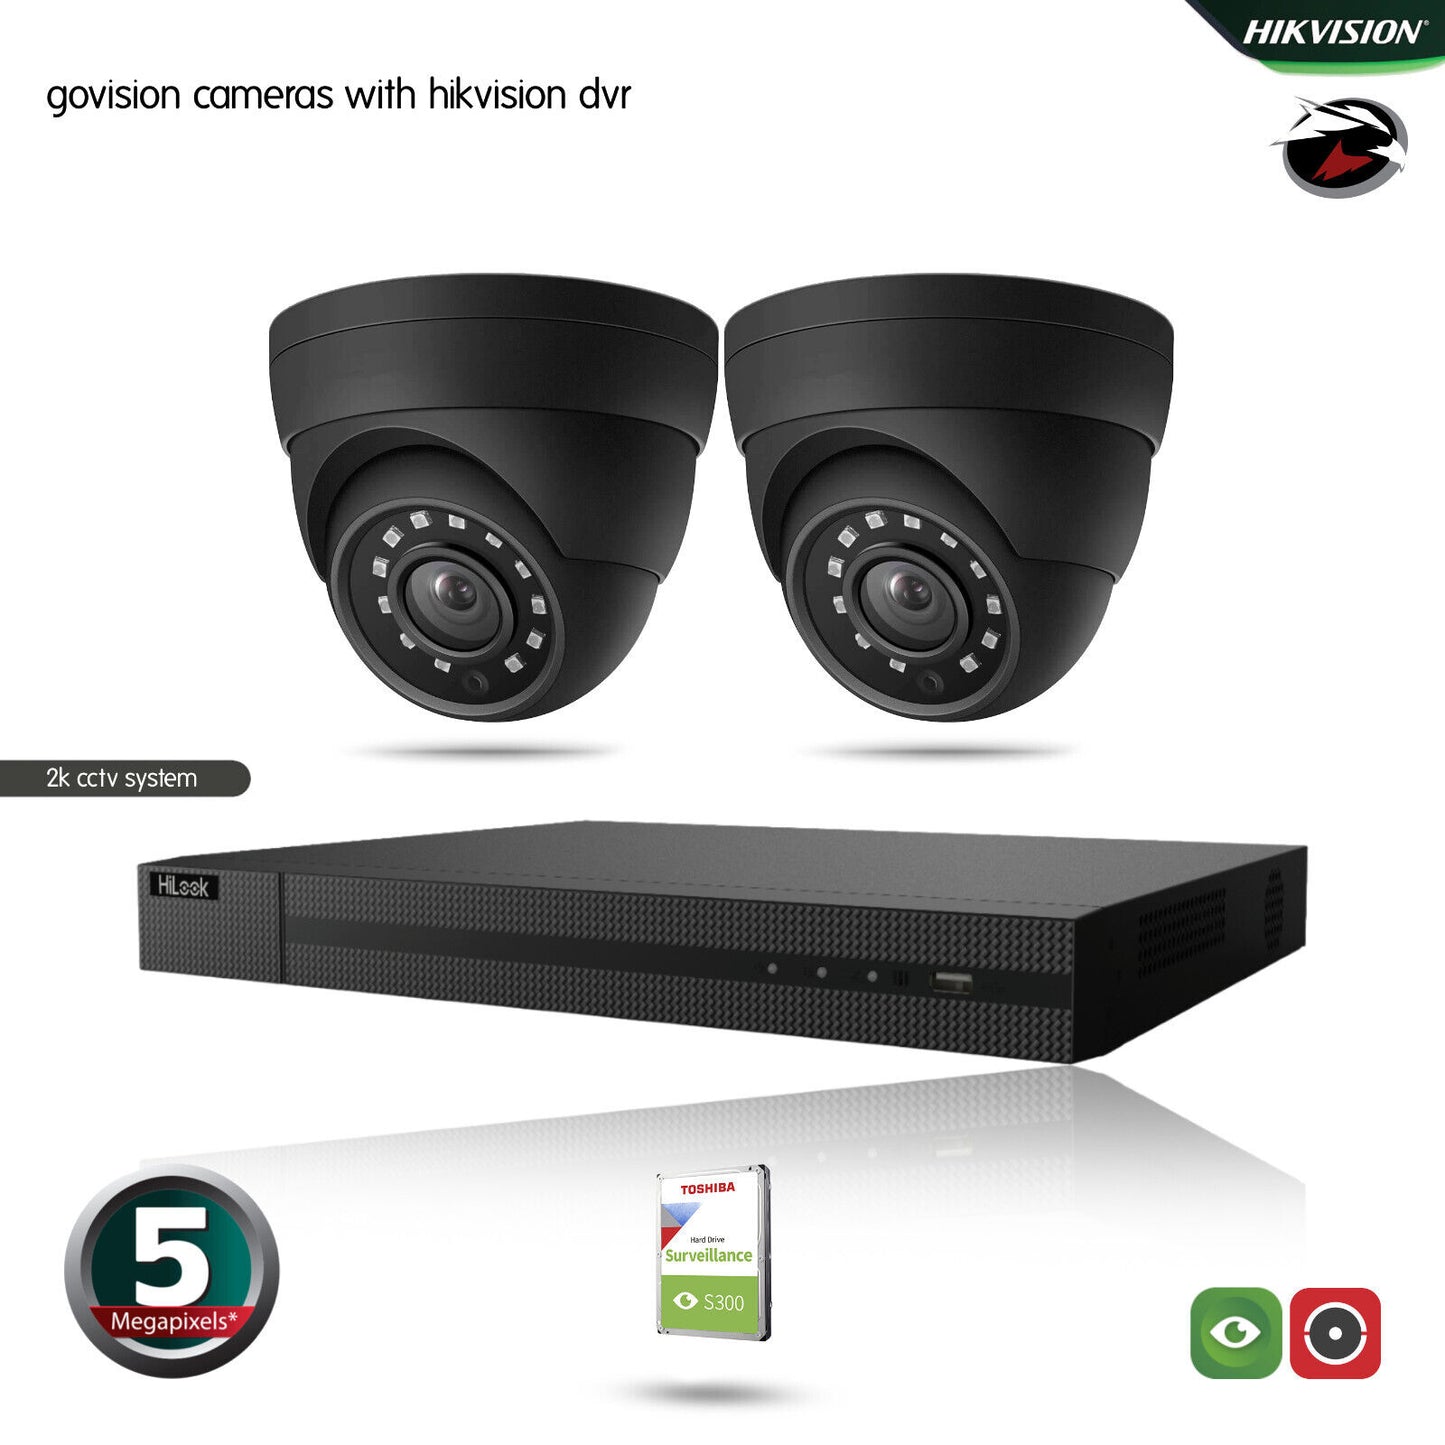 HIKVISION 5MP CCTV FULL HD NIGHT VISION OUTDOOR DVR HOME SECURITY SYSTEM KIT UK 4CH DVR 2xCameras (gray) 2TB HDD